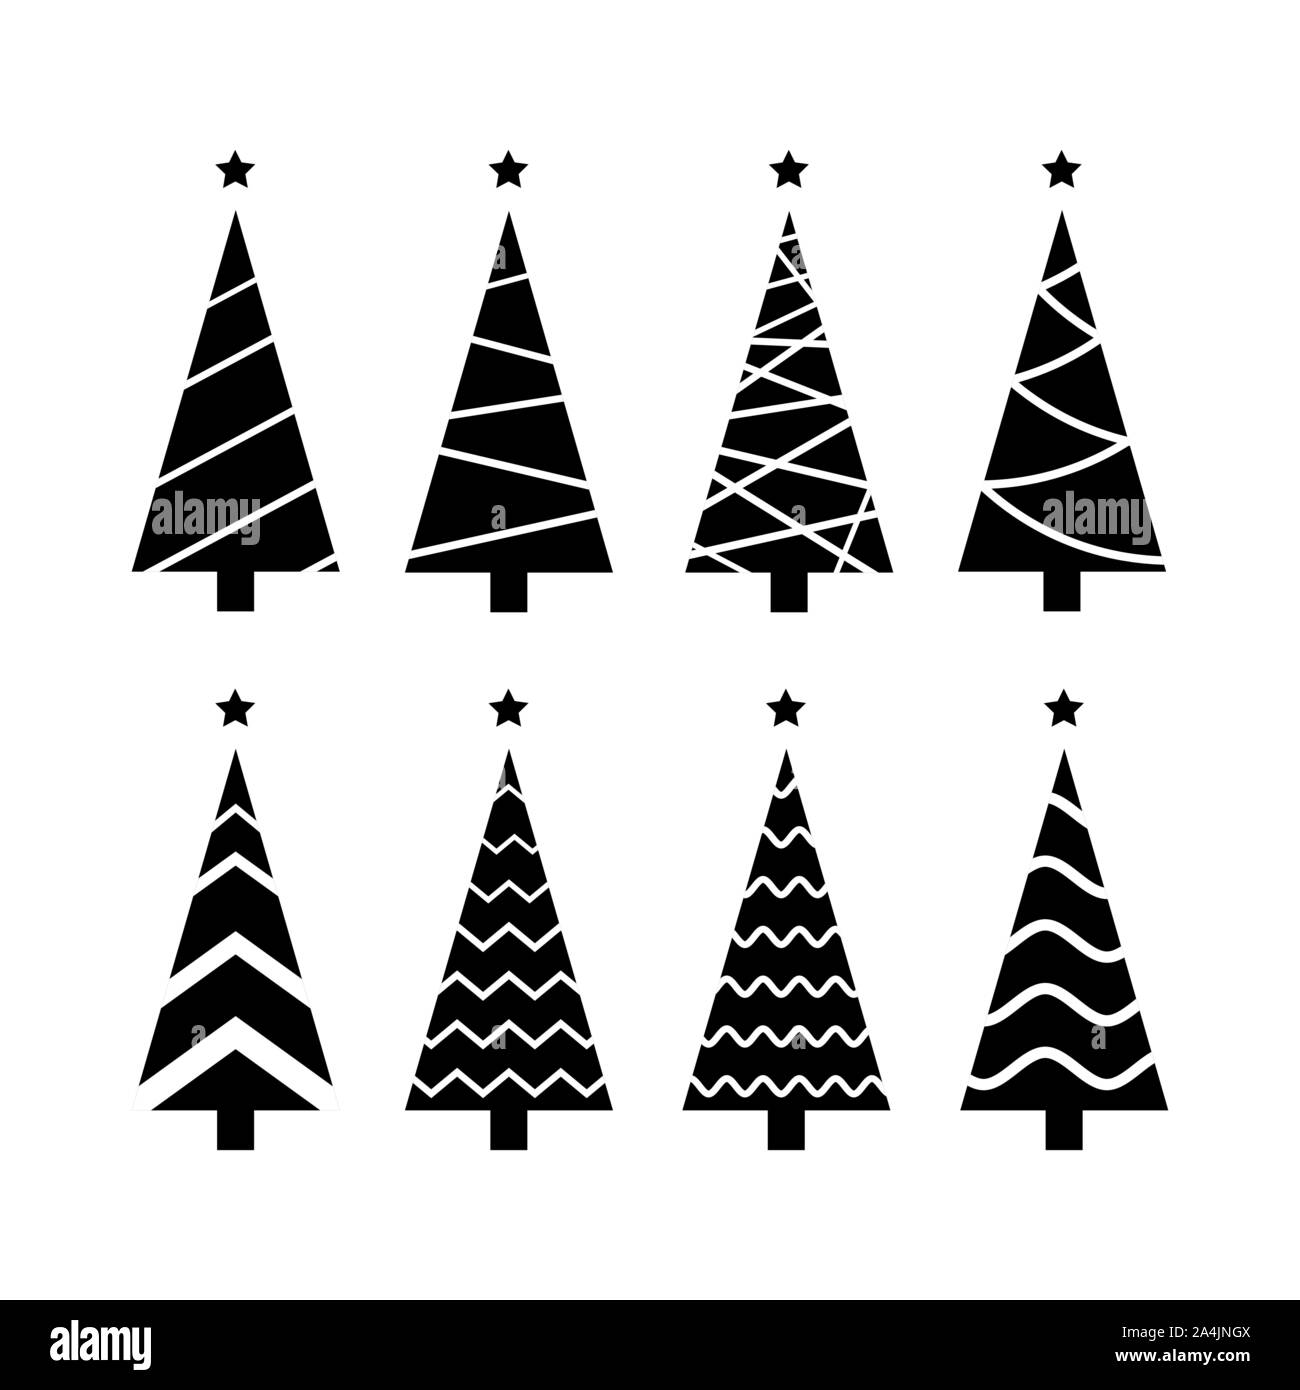 collection Christmas tree black for icon, logo, card, decor. set of vector tree silhouette isolated on white background. Stock Vector